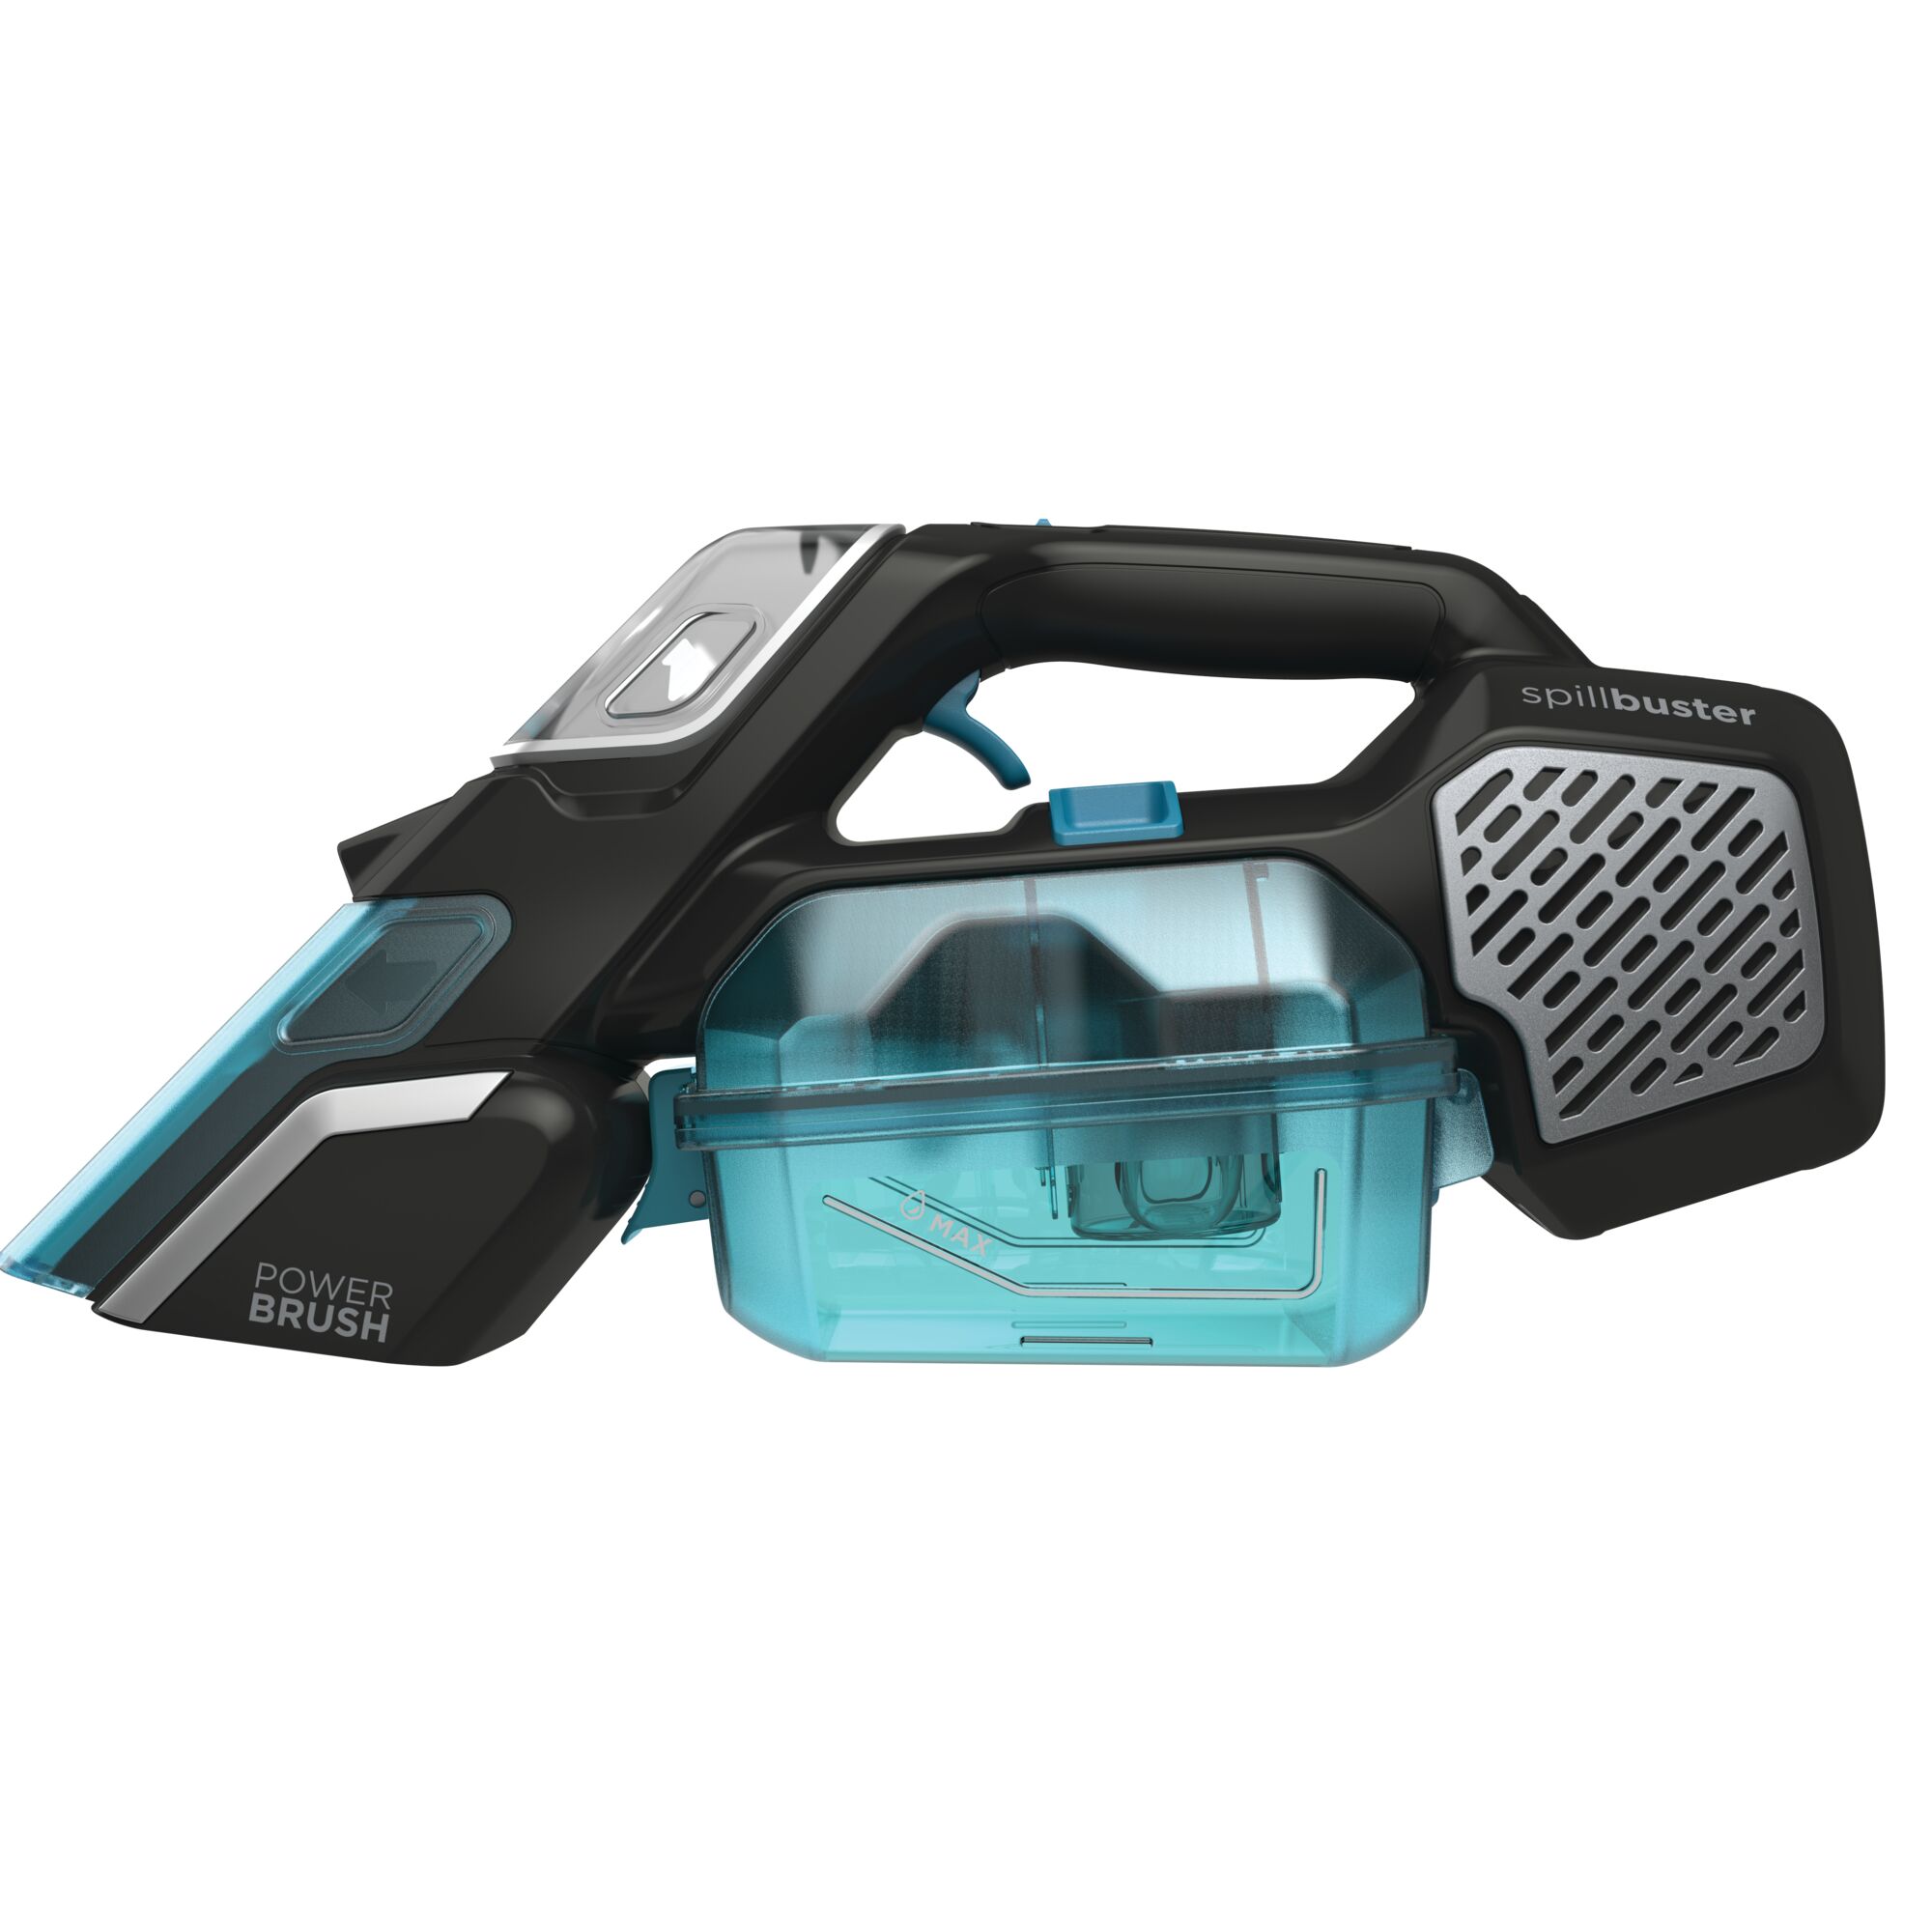 Profile of Black and decker Spillbuster Cordless Spill And Spot Portable Carpet Cleaner